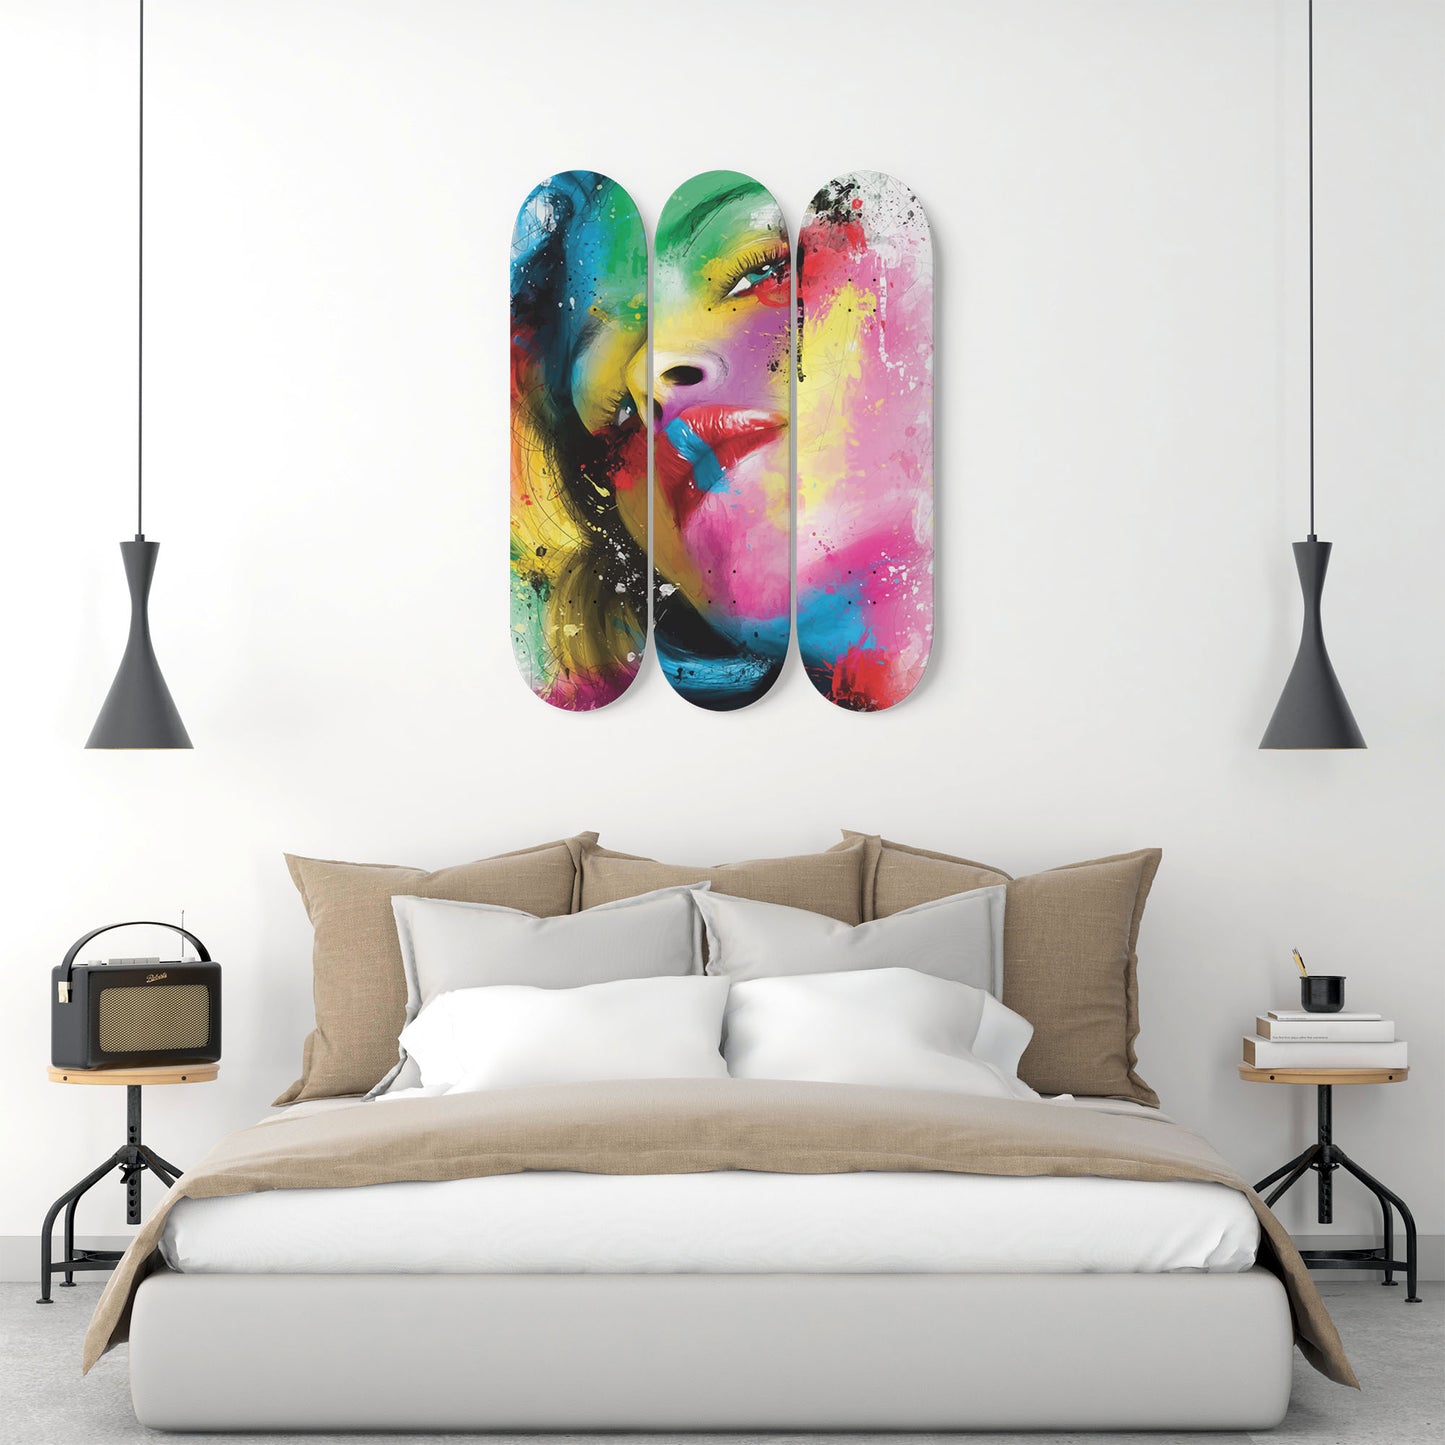 Random Colorful Artwork 16 | Skateboard Deck Wall Art, Wall Hanged Room Decoration, Maple Wood, Accent Gift for Home, Aesthetic Wall Art